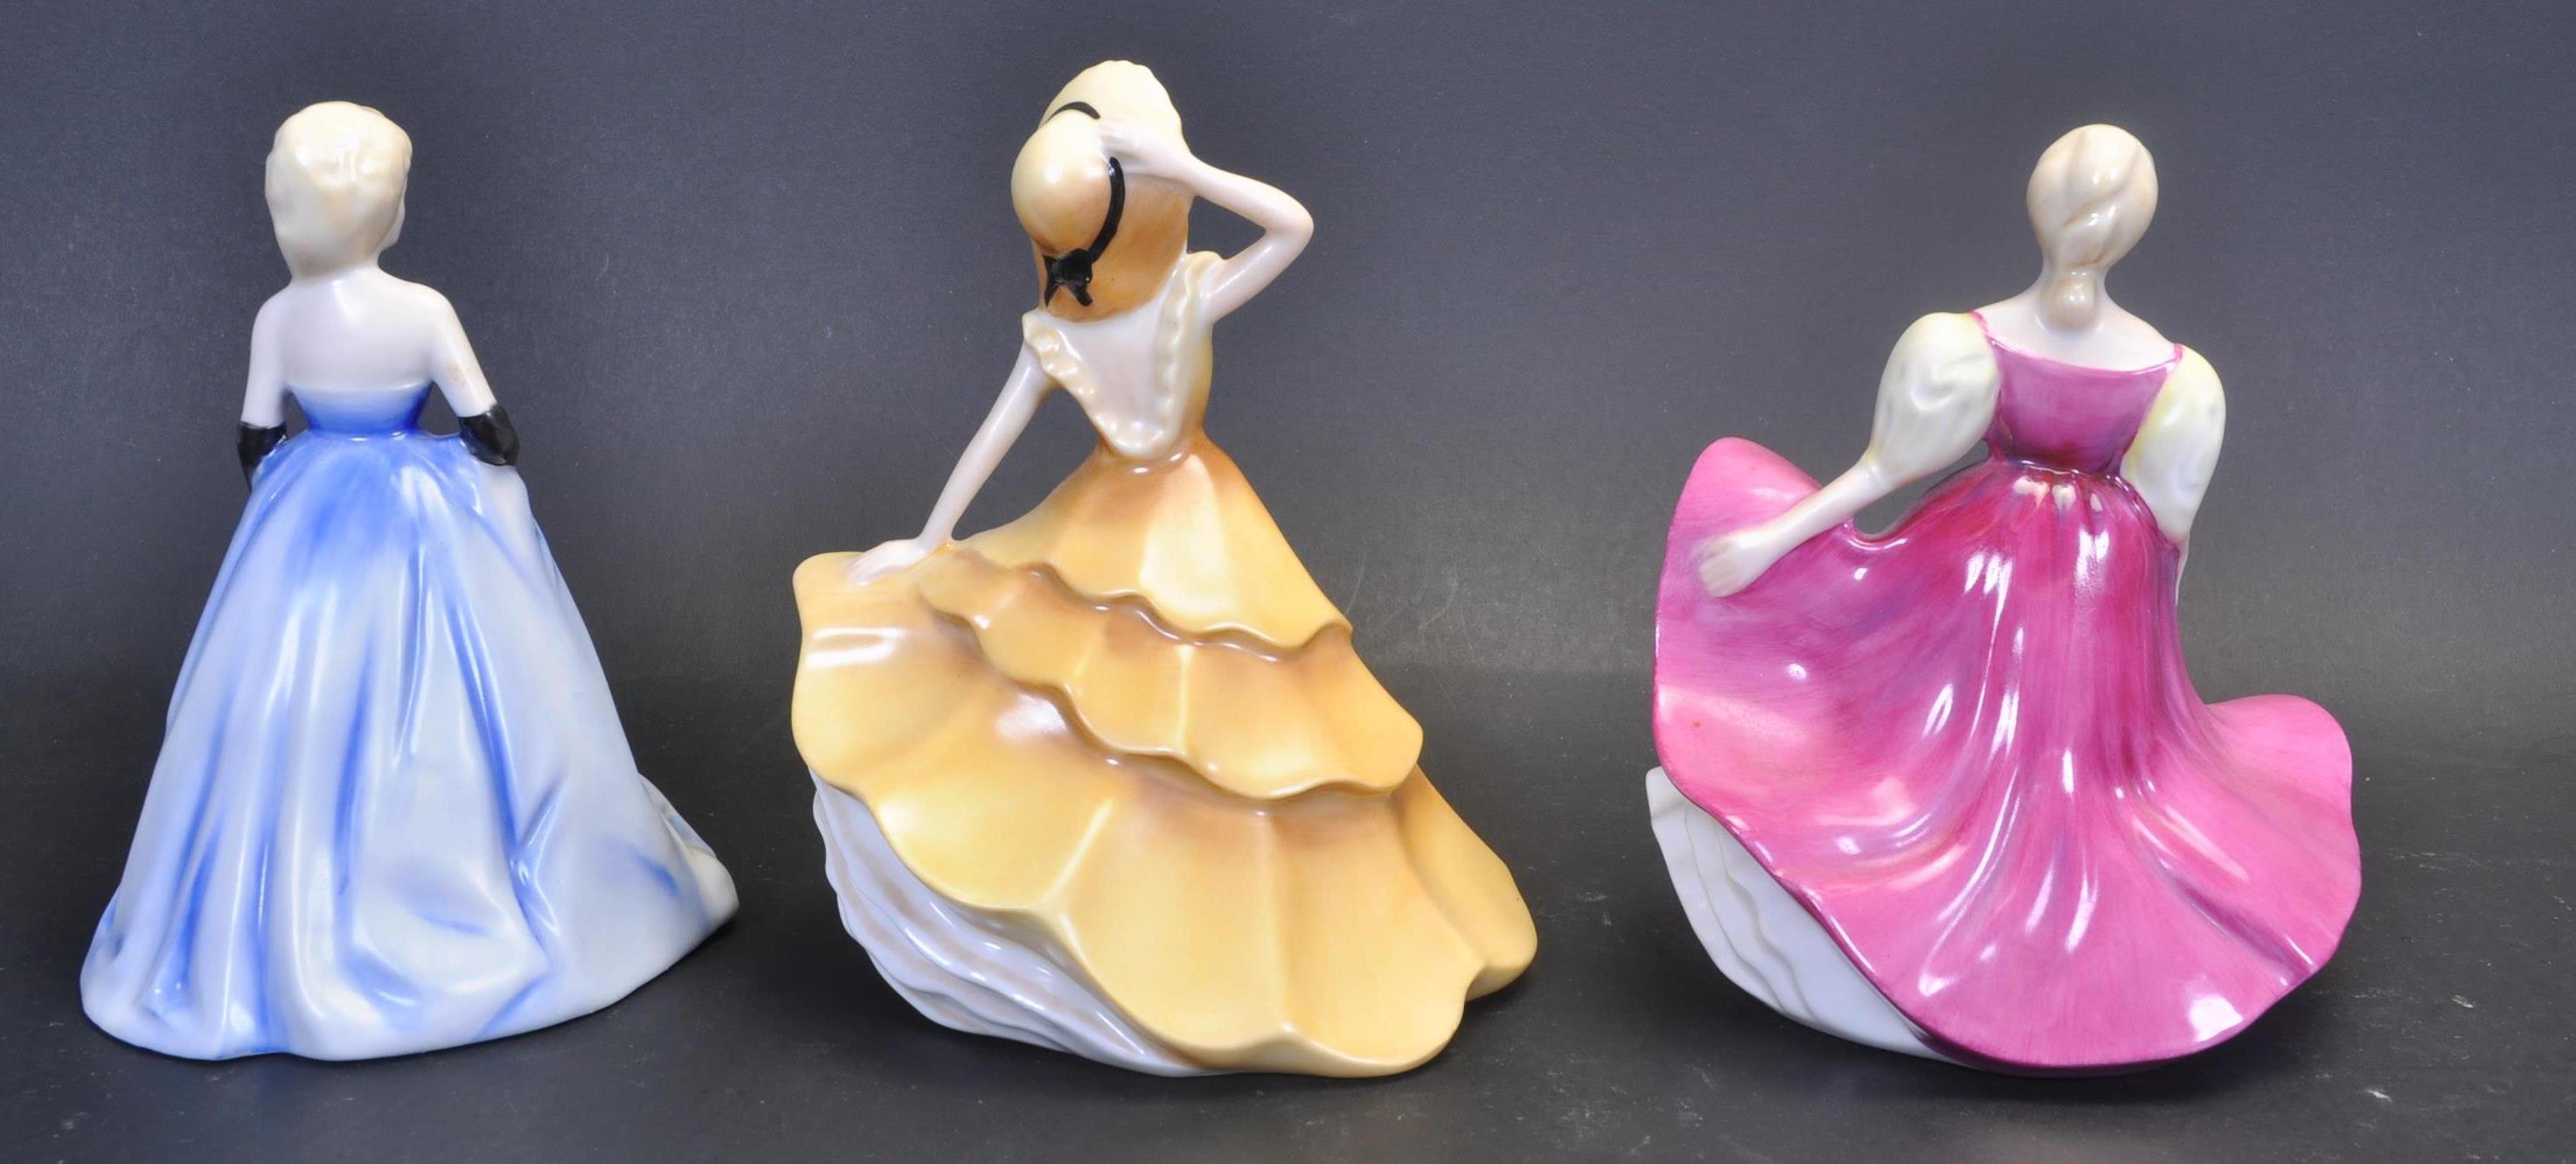 THREE WADE CERAMIC FIGURINES FROM MY FAIR LADIES COLLECTION - Image 3 of 6